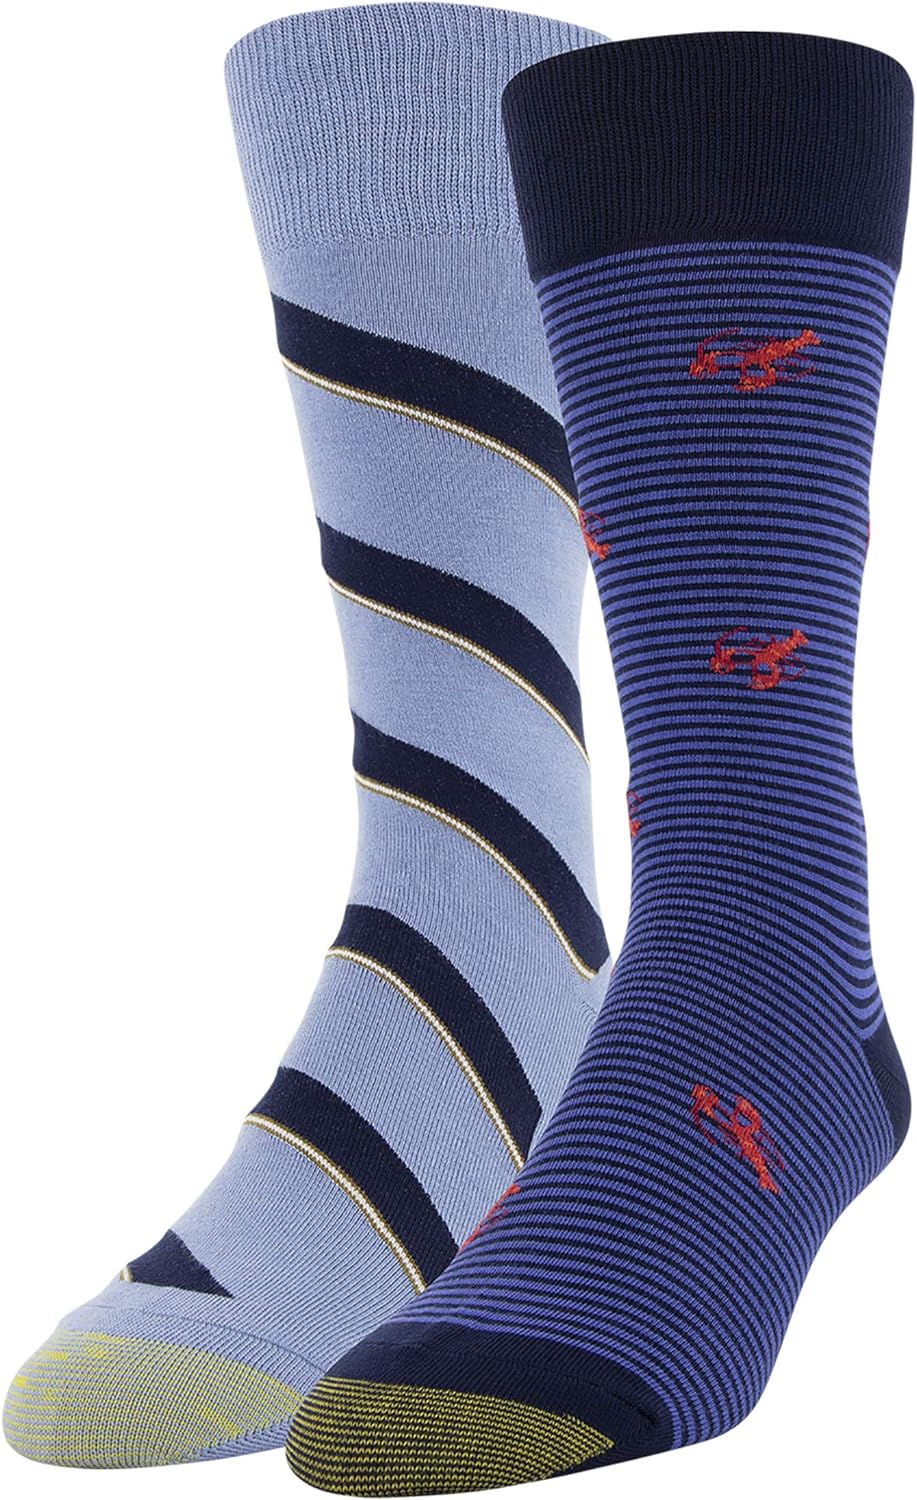 Husband prefers a soft but thinner weight dress socks for work compared to some of the heavier blend patterned options out there. Goldtoe socks are his favorites - reliably good, coordinate nicely with variety of trousers, wash and wear well. Fit as expected, great purchase.